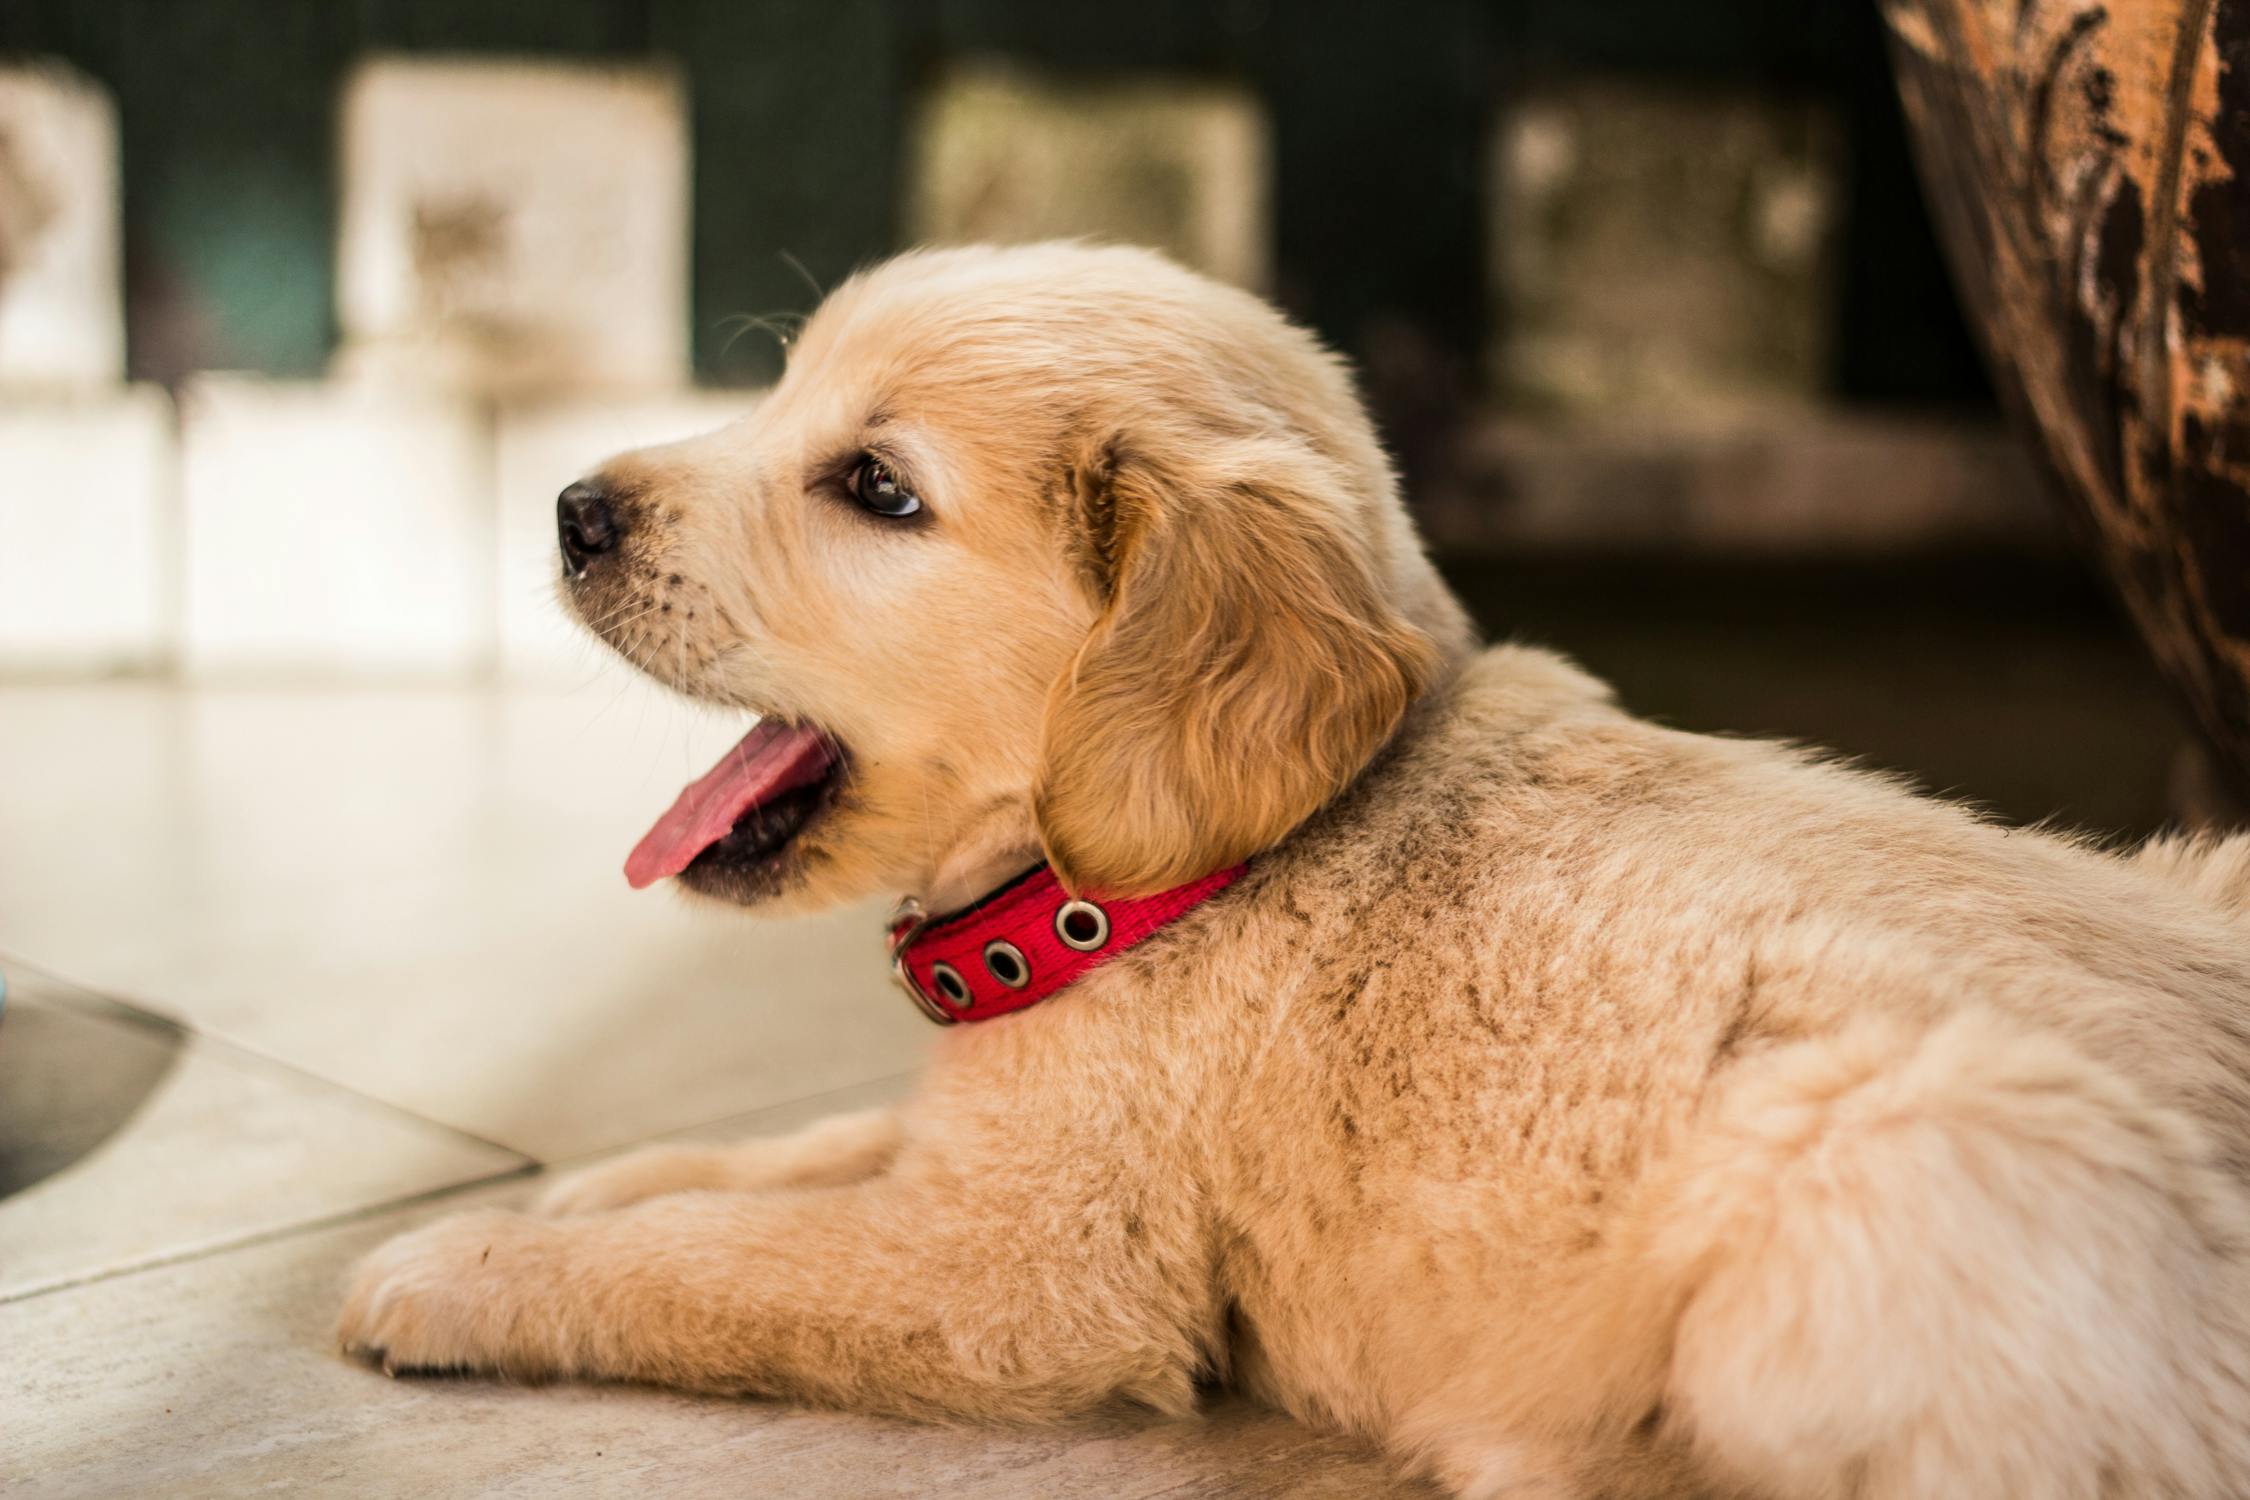 Two Of The Most Common Puppy-Raising Problems And How To Fix Them